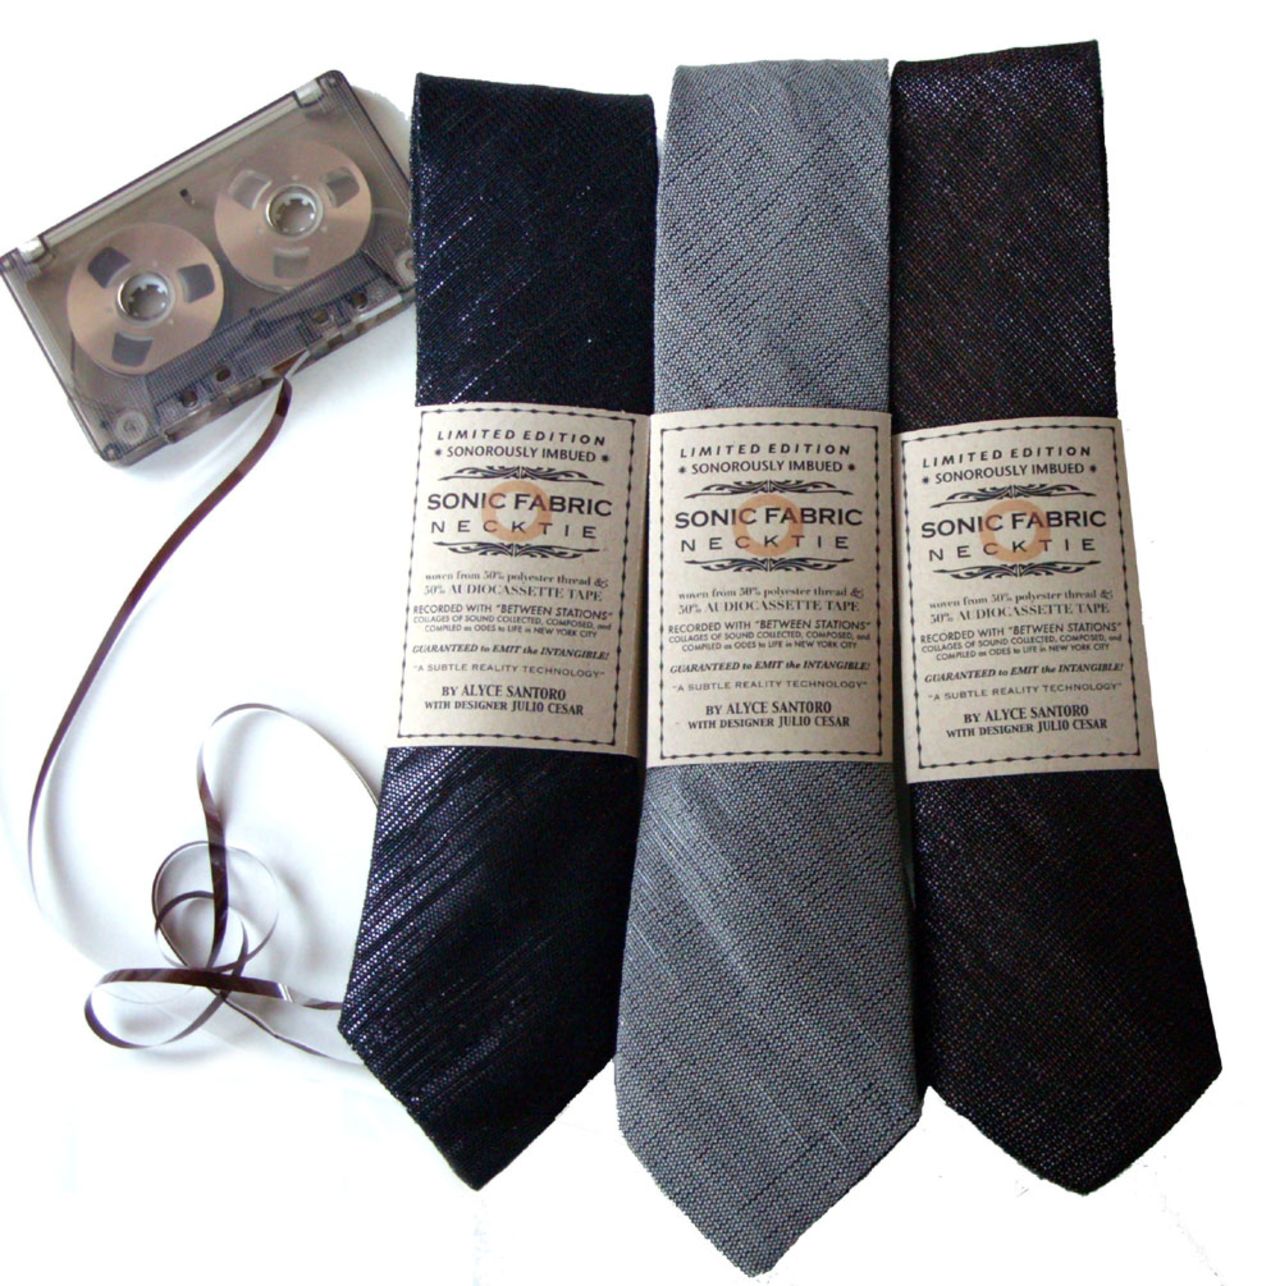 Artist and sound designer Alyce Santoro has released a range of sonic fabric neckties, in collaboration with fashion designer Julio Cesar. The ties are made of old cassette tape and can be played with a converted tape player. 